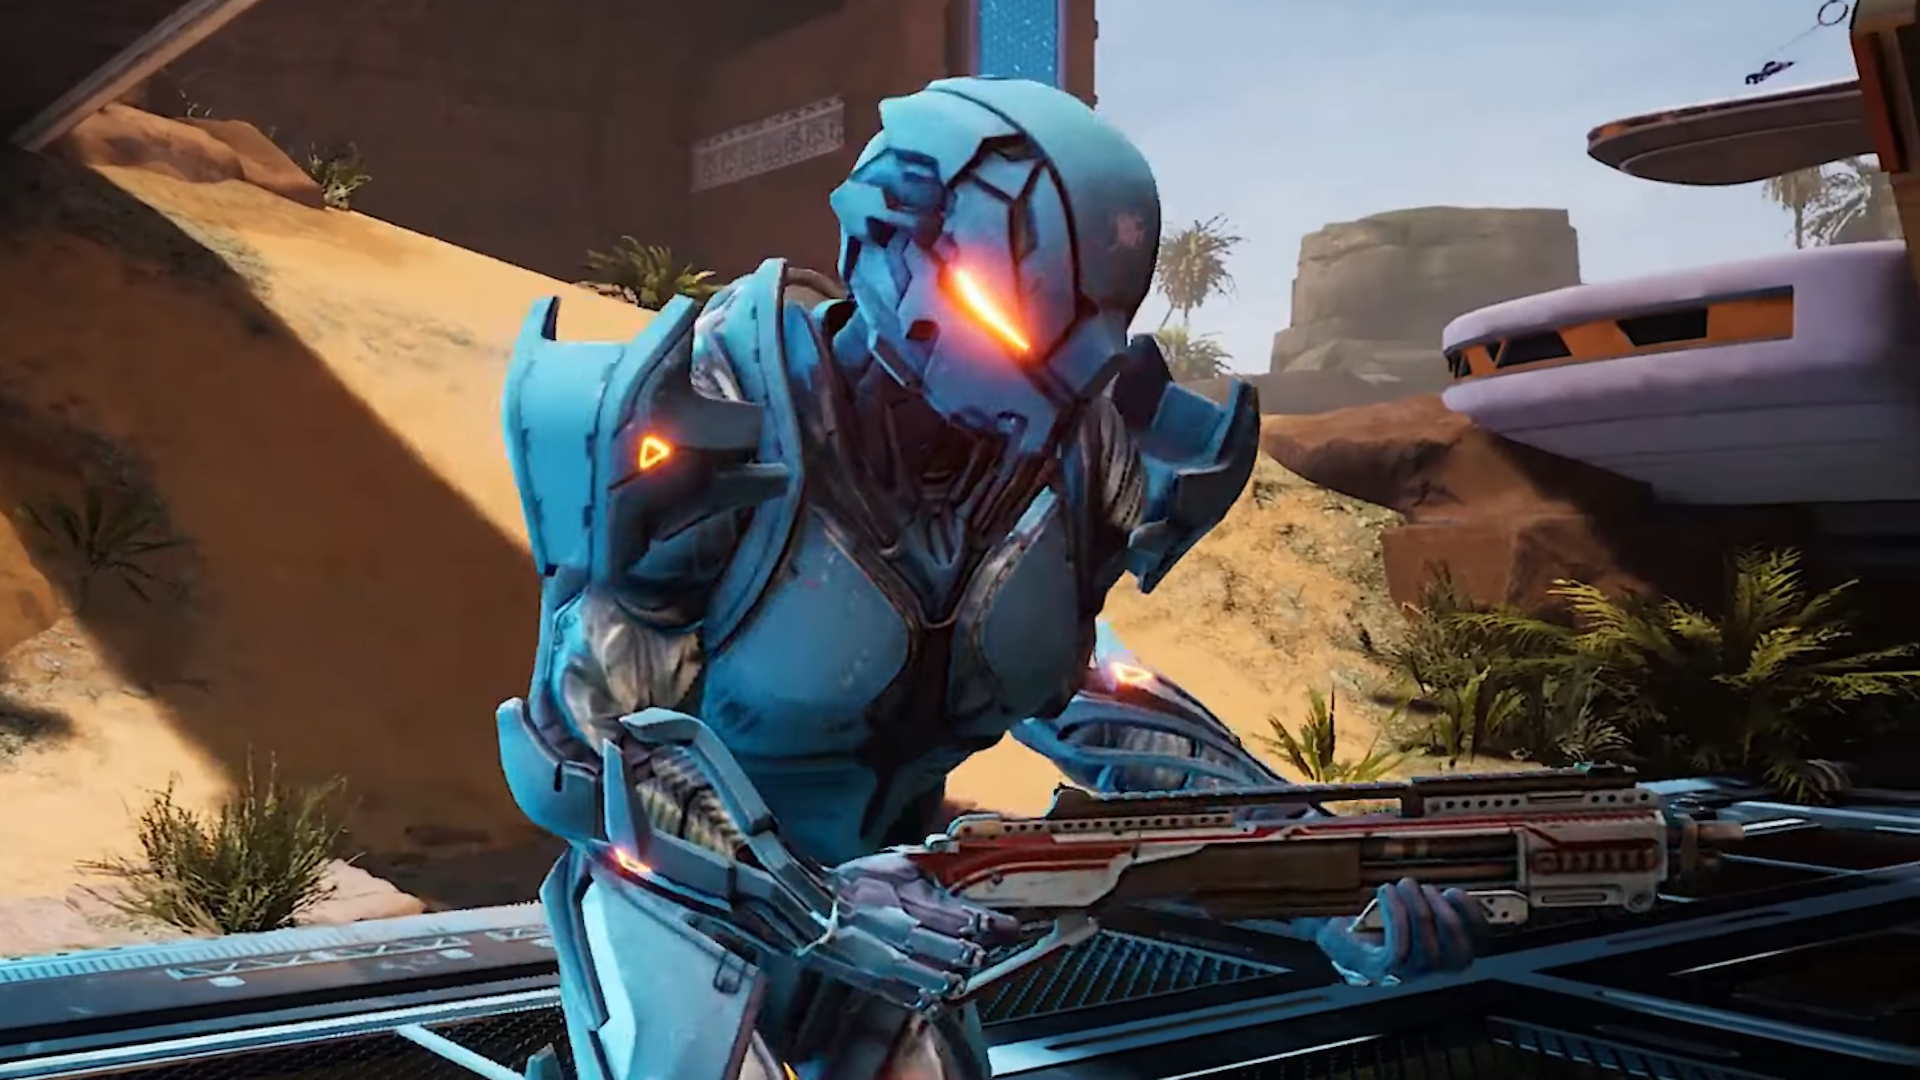 A new Splitgate game is in development as 1047 Games moves on